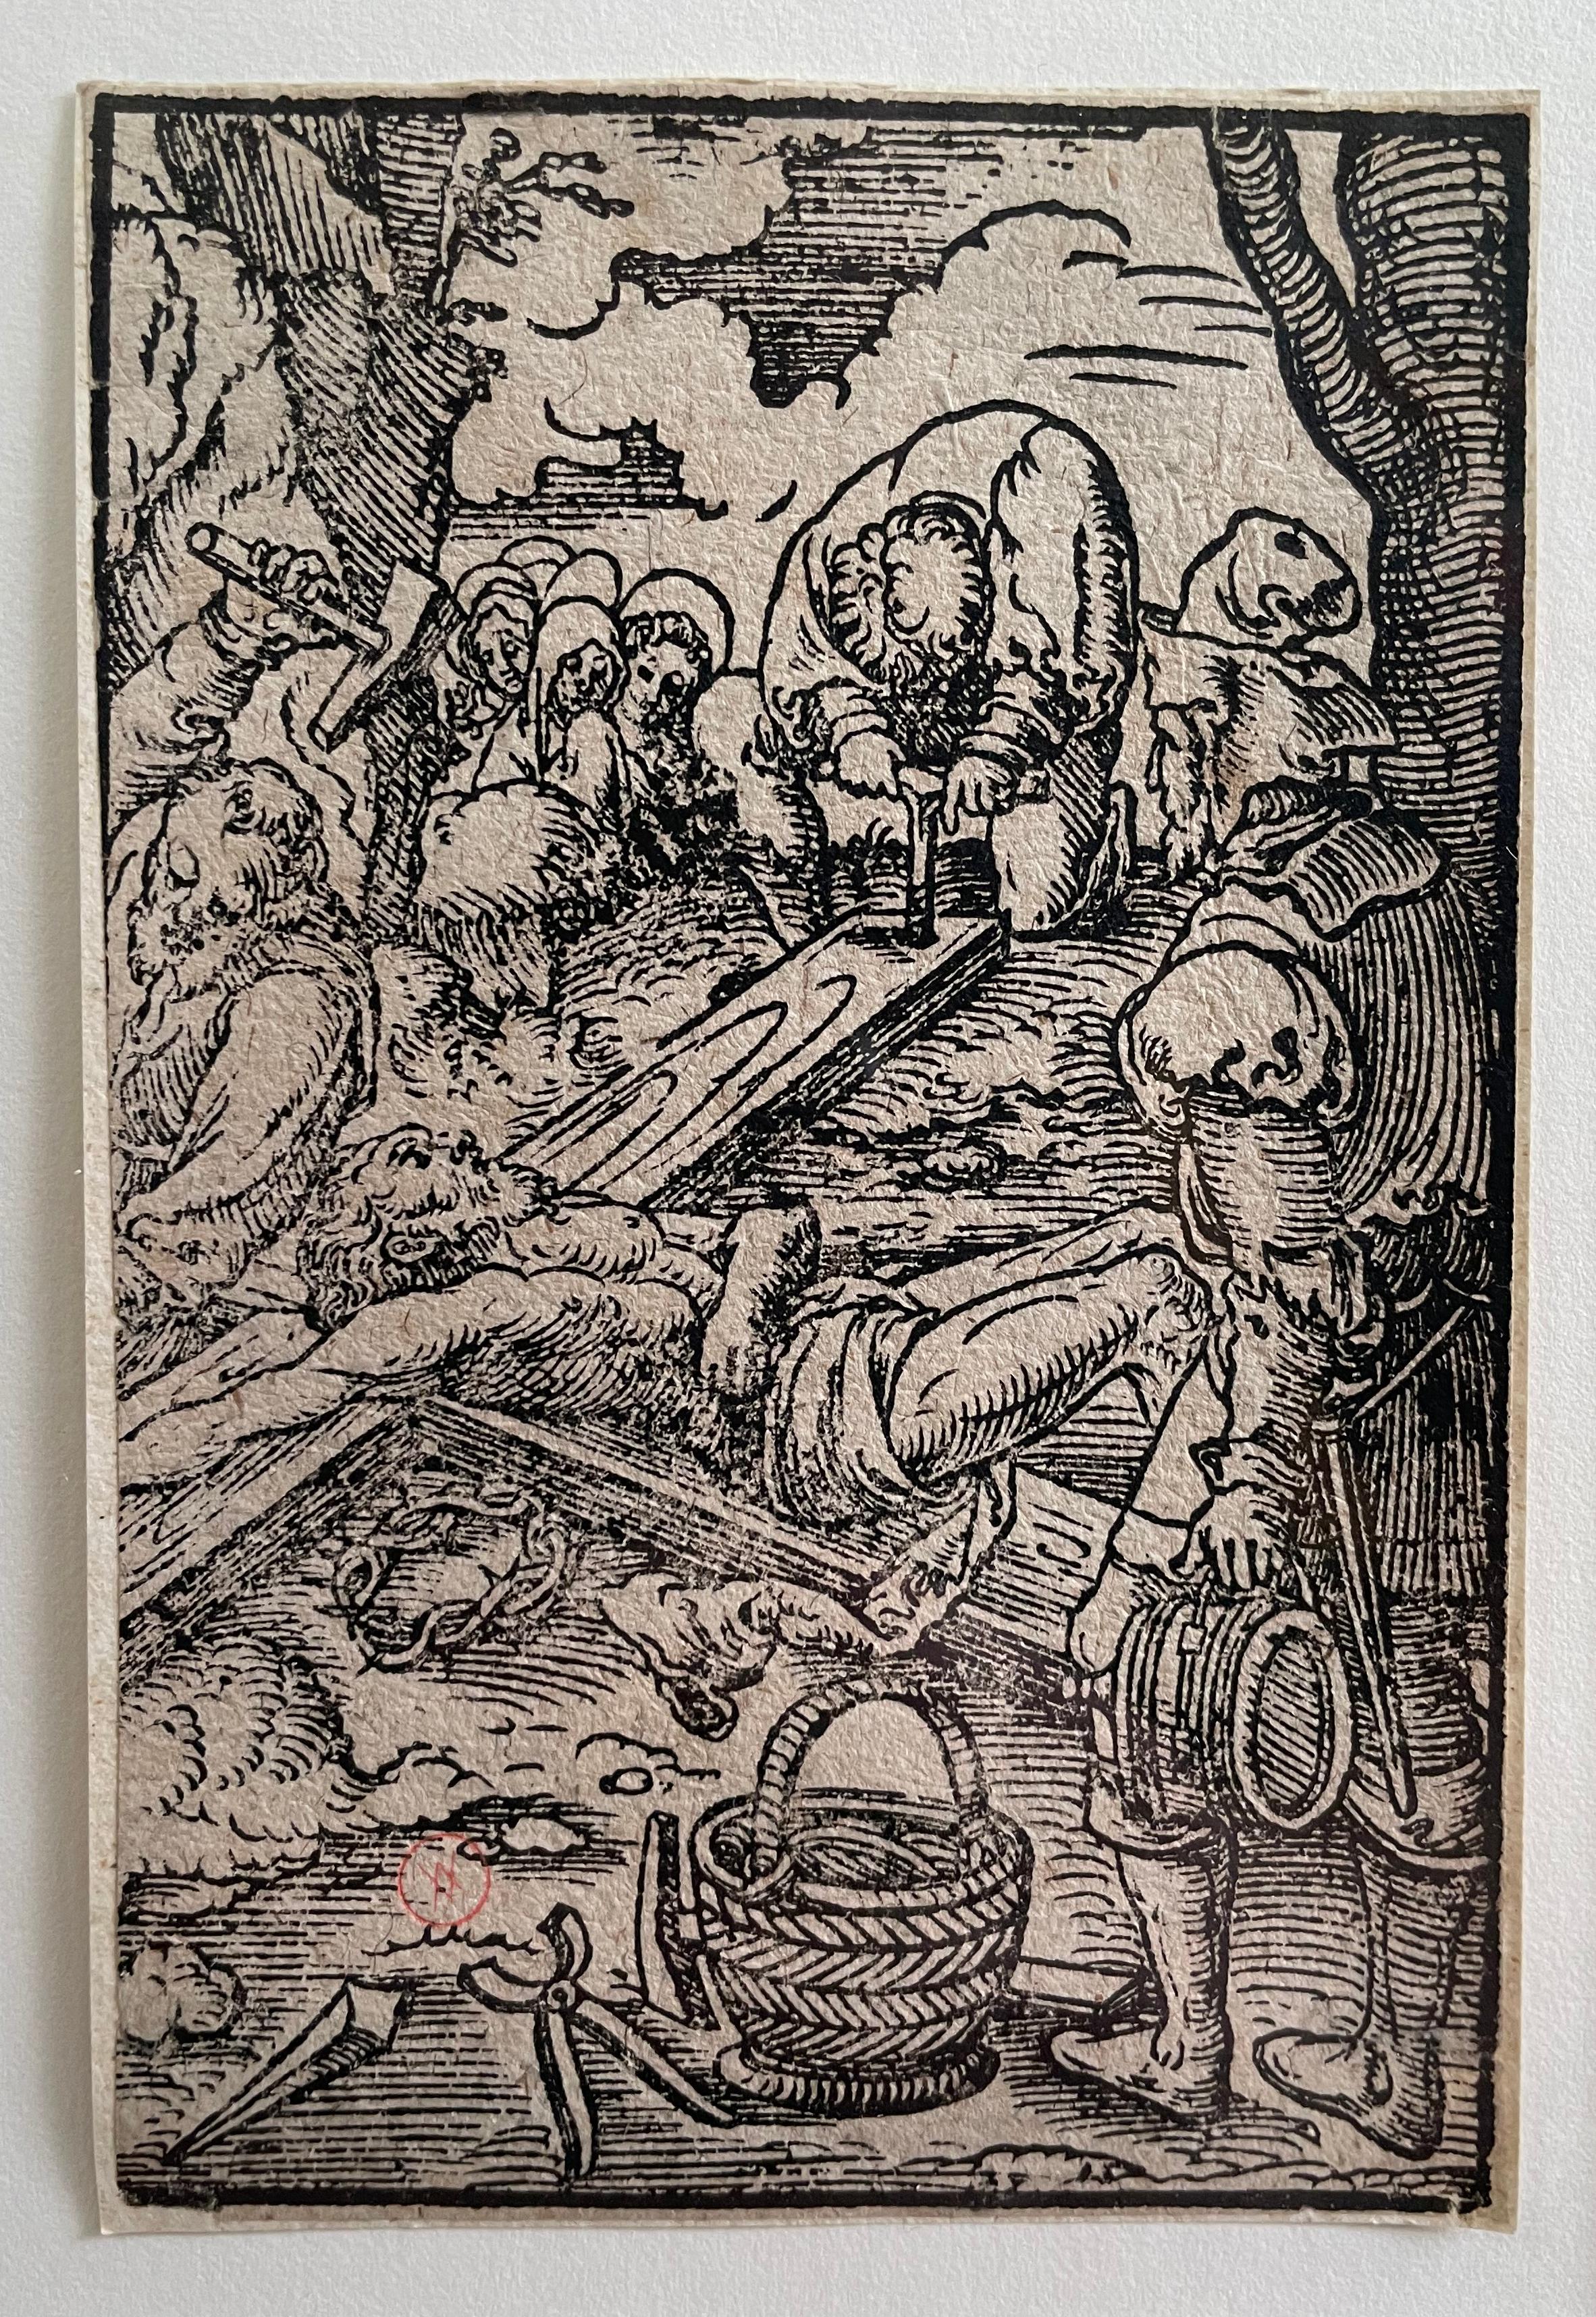 This woodcut print, depicting the 'Christ Nailed to the Cross,' is a rare image coming from a small passional. Passionals were a popular kind of devotional text for the layperson of the 16th century describing the suffering of saints and martyrs,